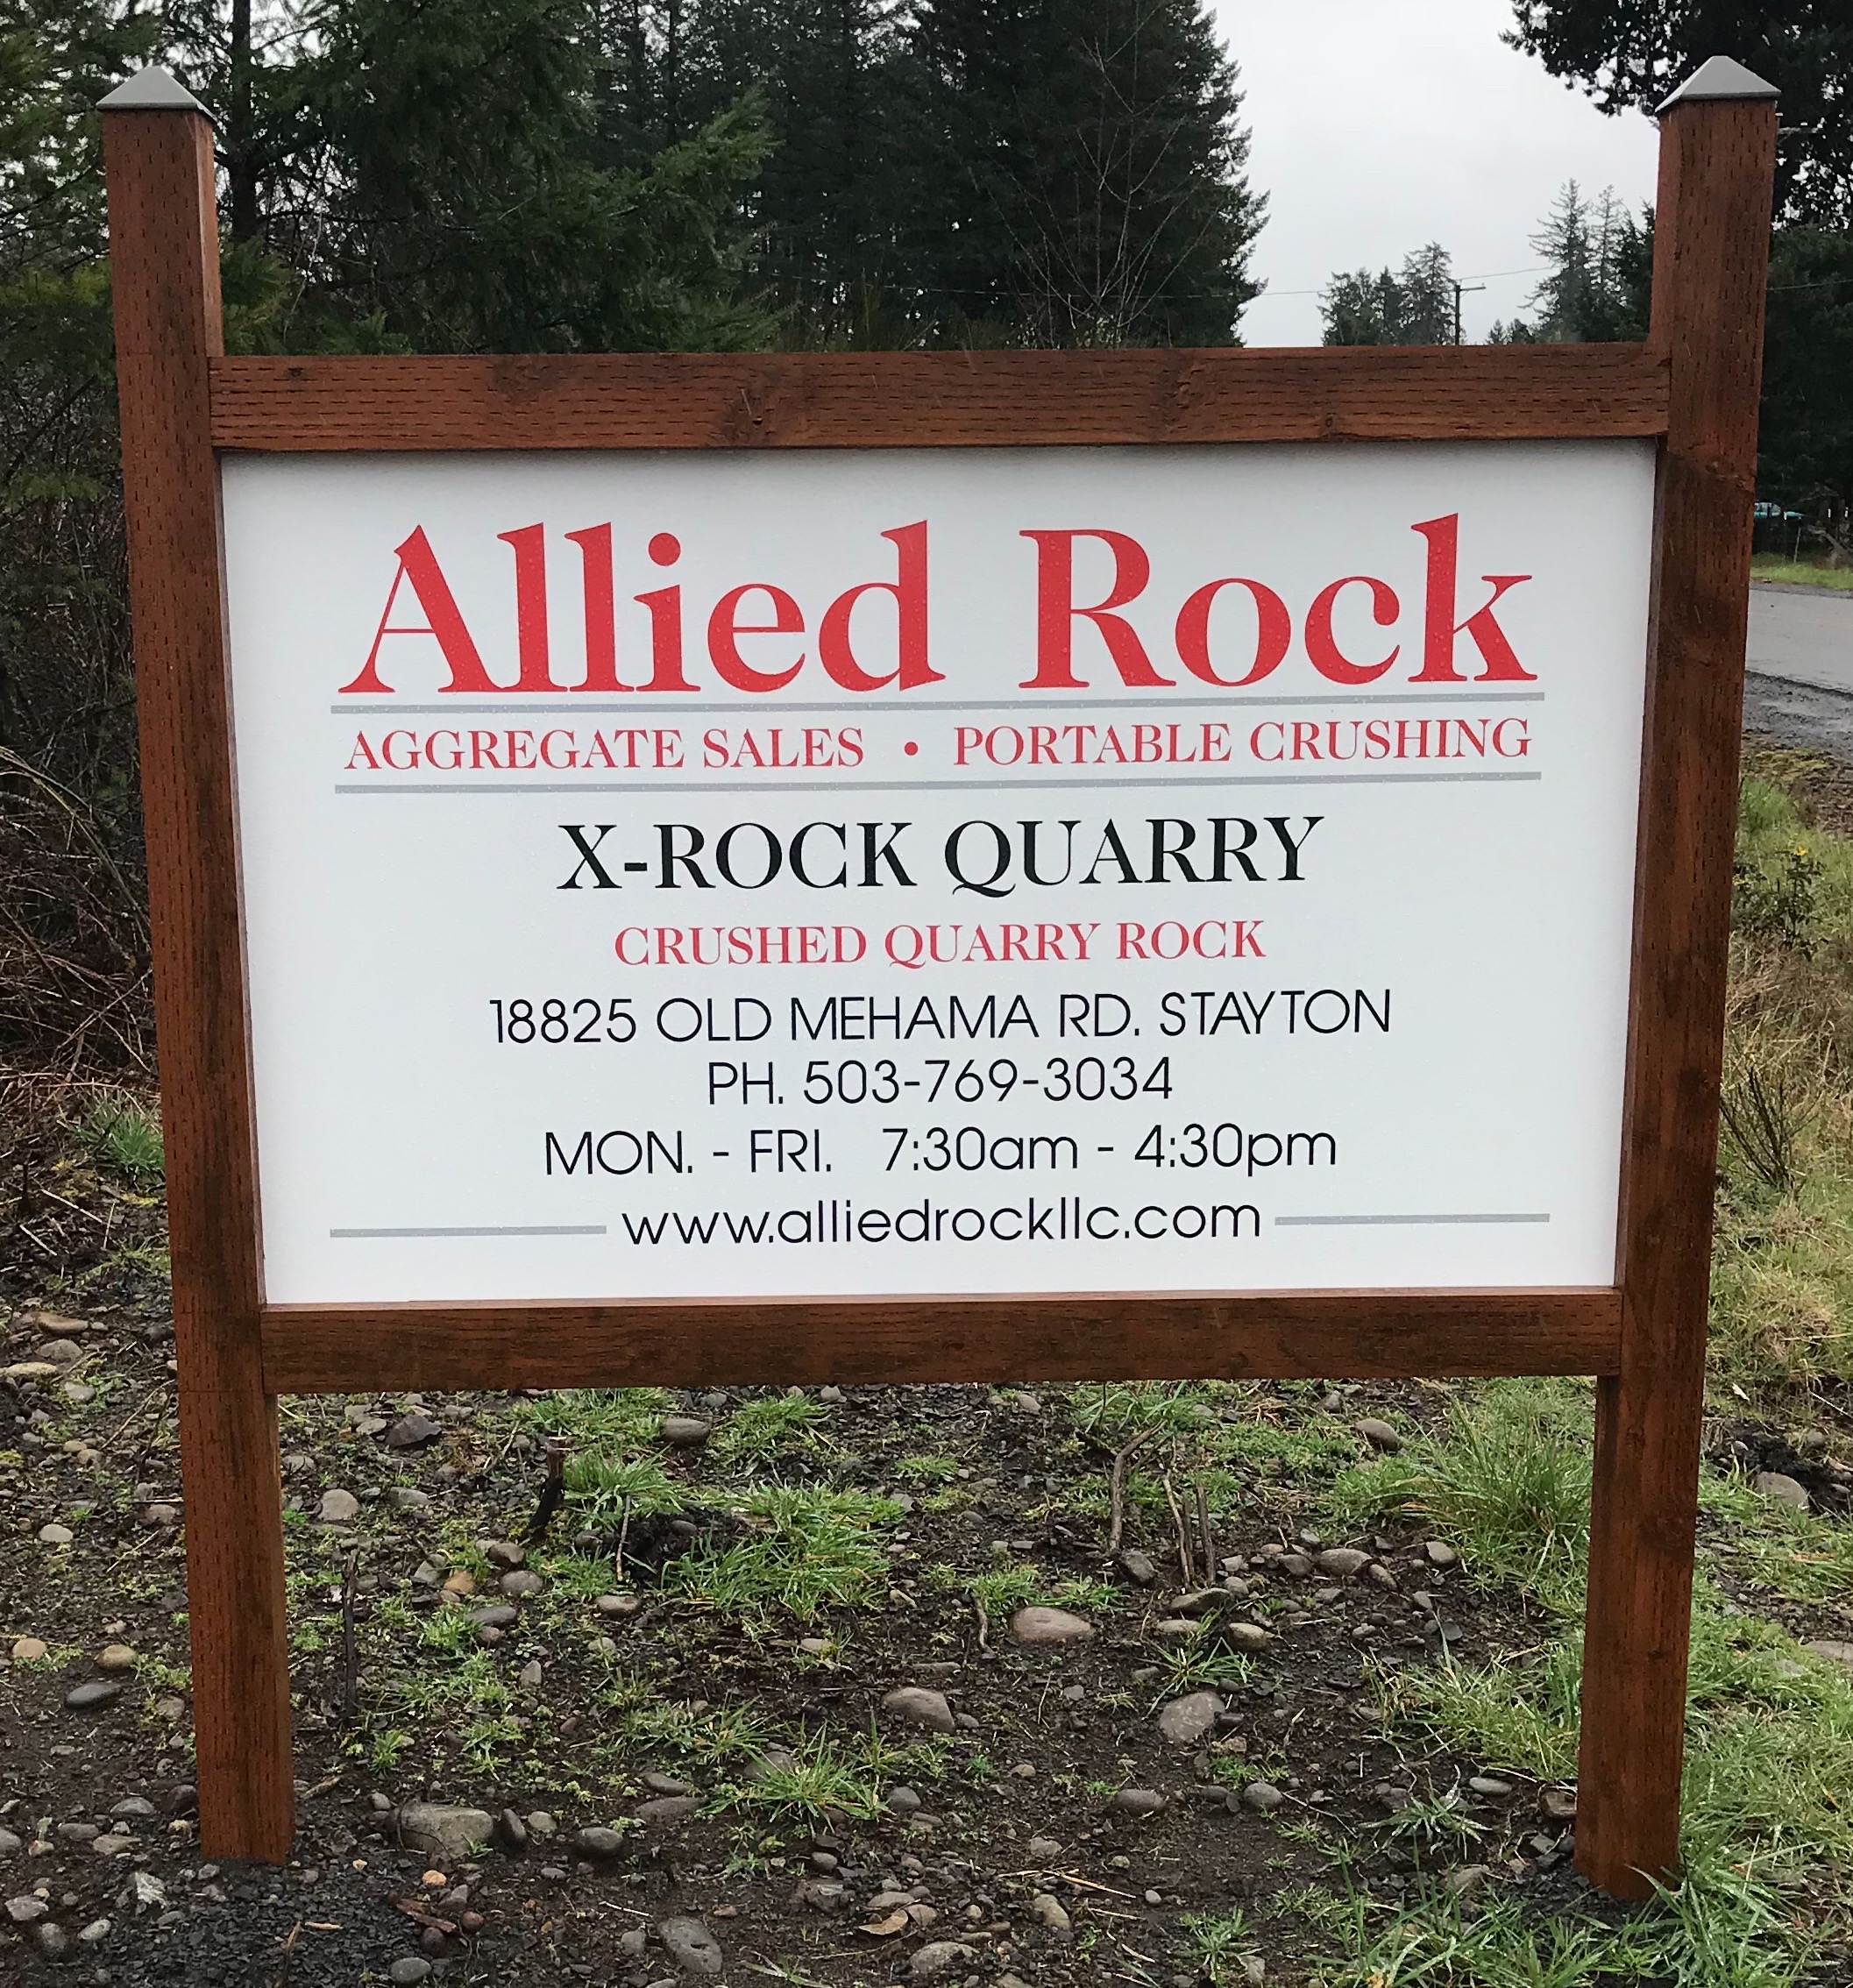 Allied Rock acquired the X-Rock Quarry